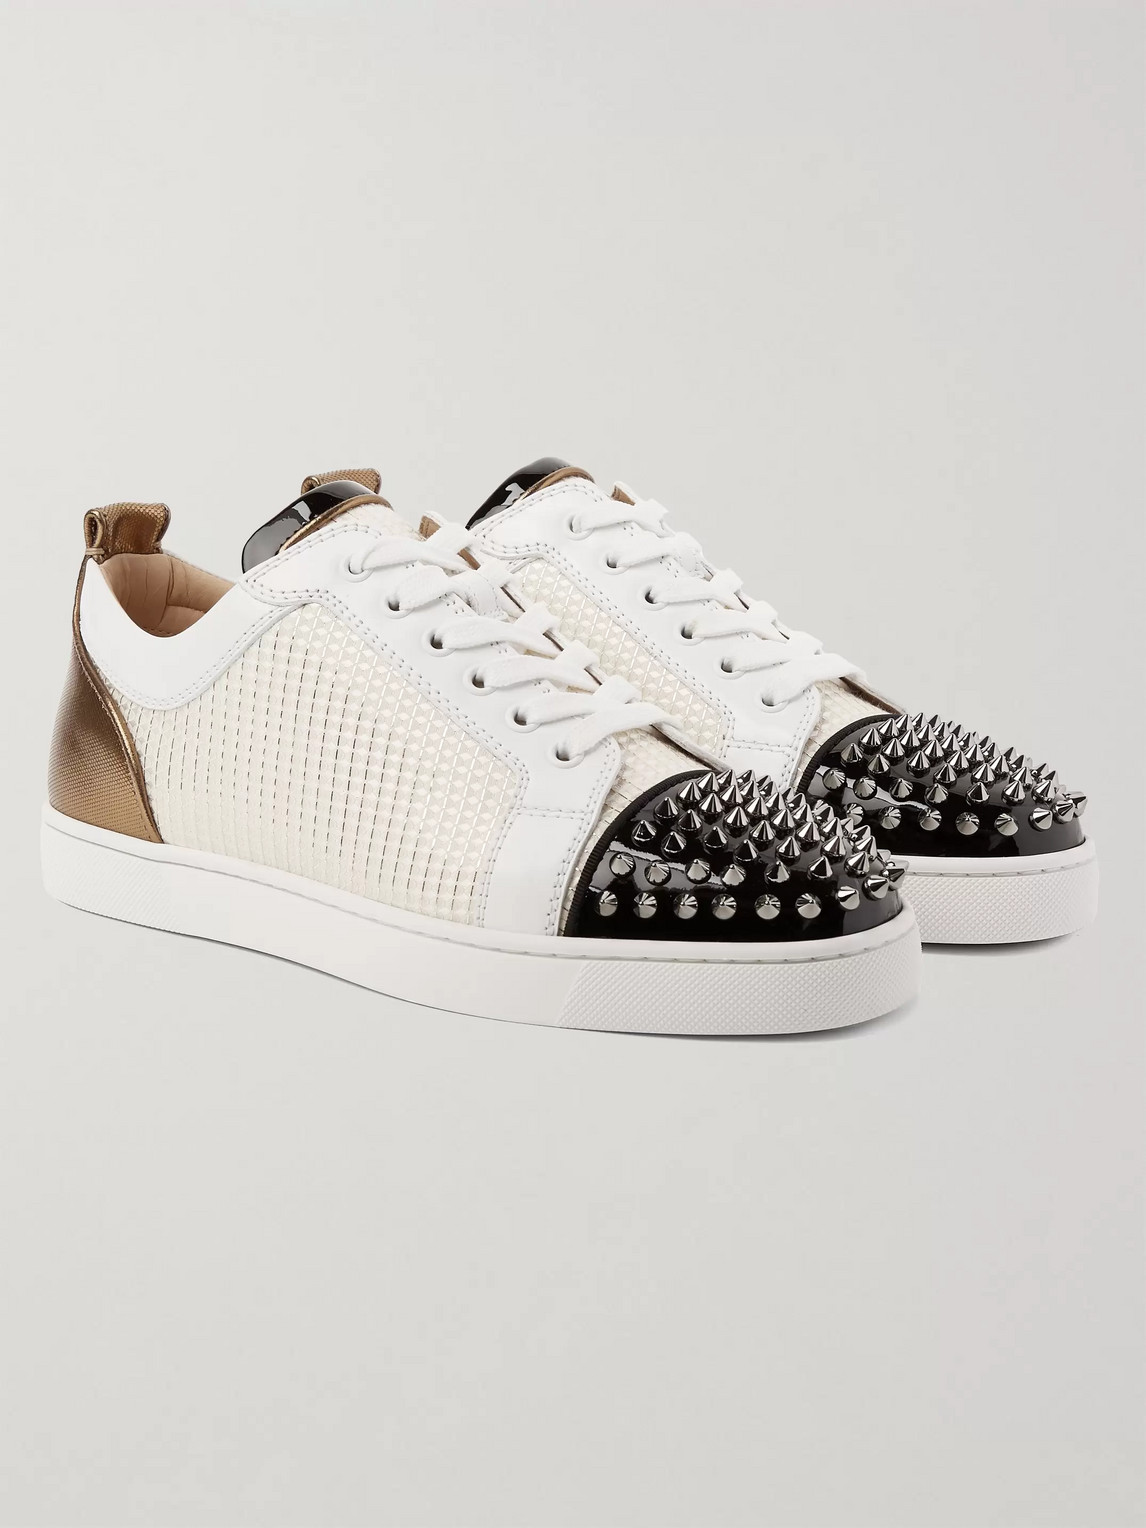 CHRISTIAN LOUBOUTIN LOUIS JUNIOR SPIKES ORLATO LEATHER AND JACQUARD SNEAKERS